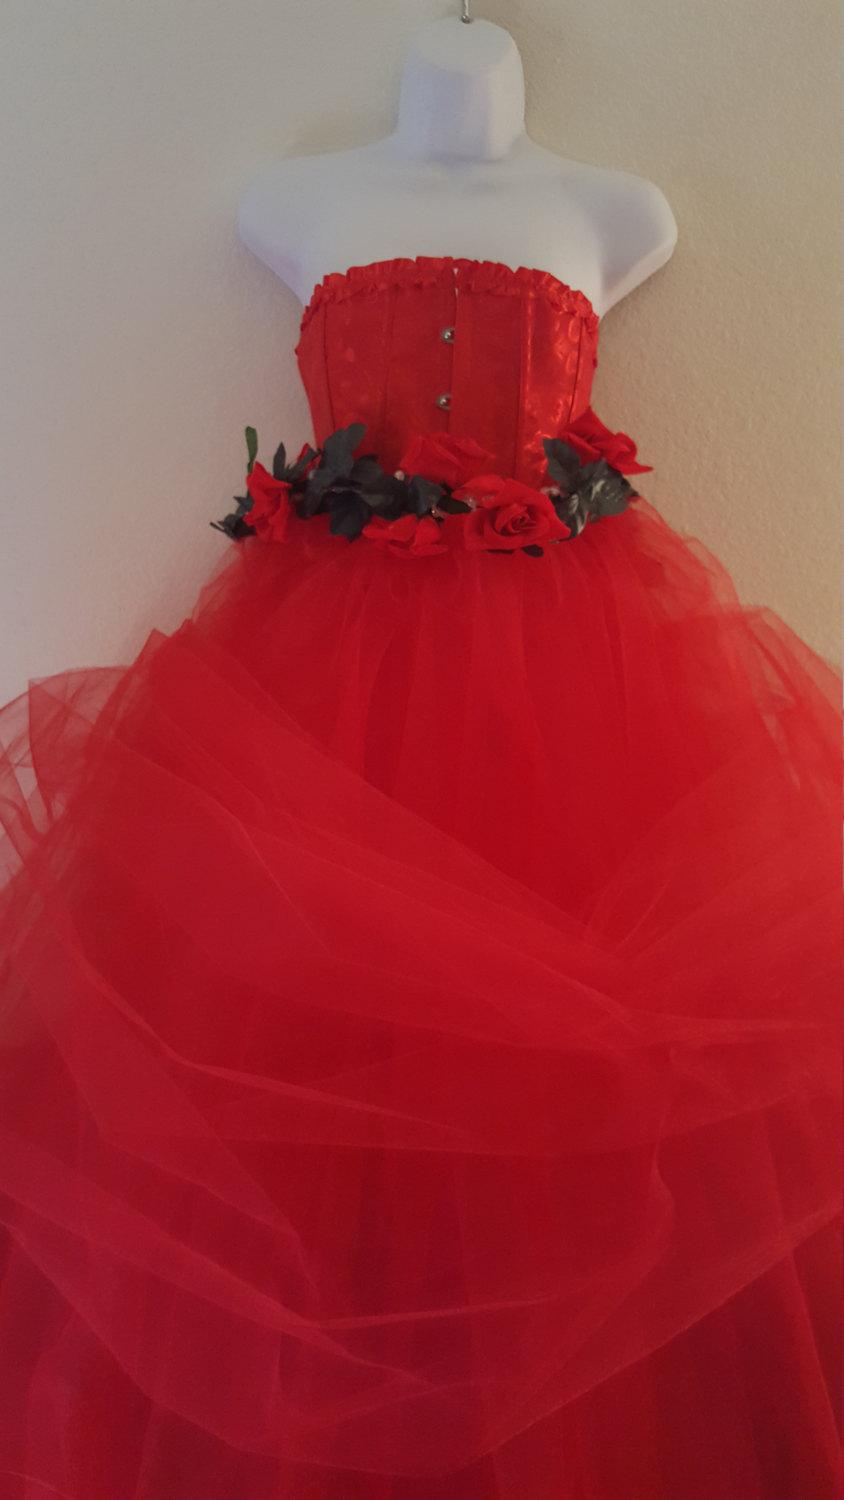 Mariage - Victorian Inspired Valentine Rose Goddess Romantic Red Corset Tulle Ball Gown Dress Bridal Wedding Gown Party Costume